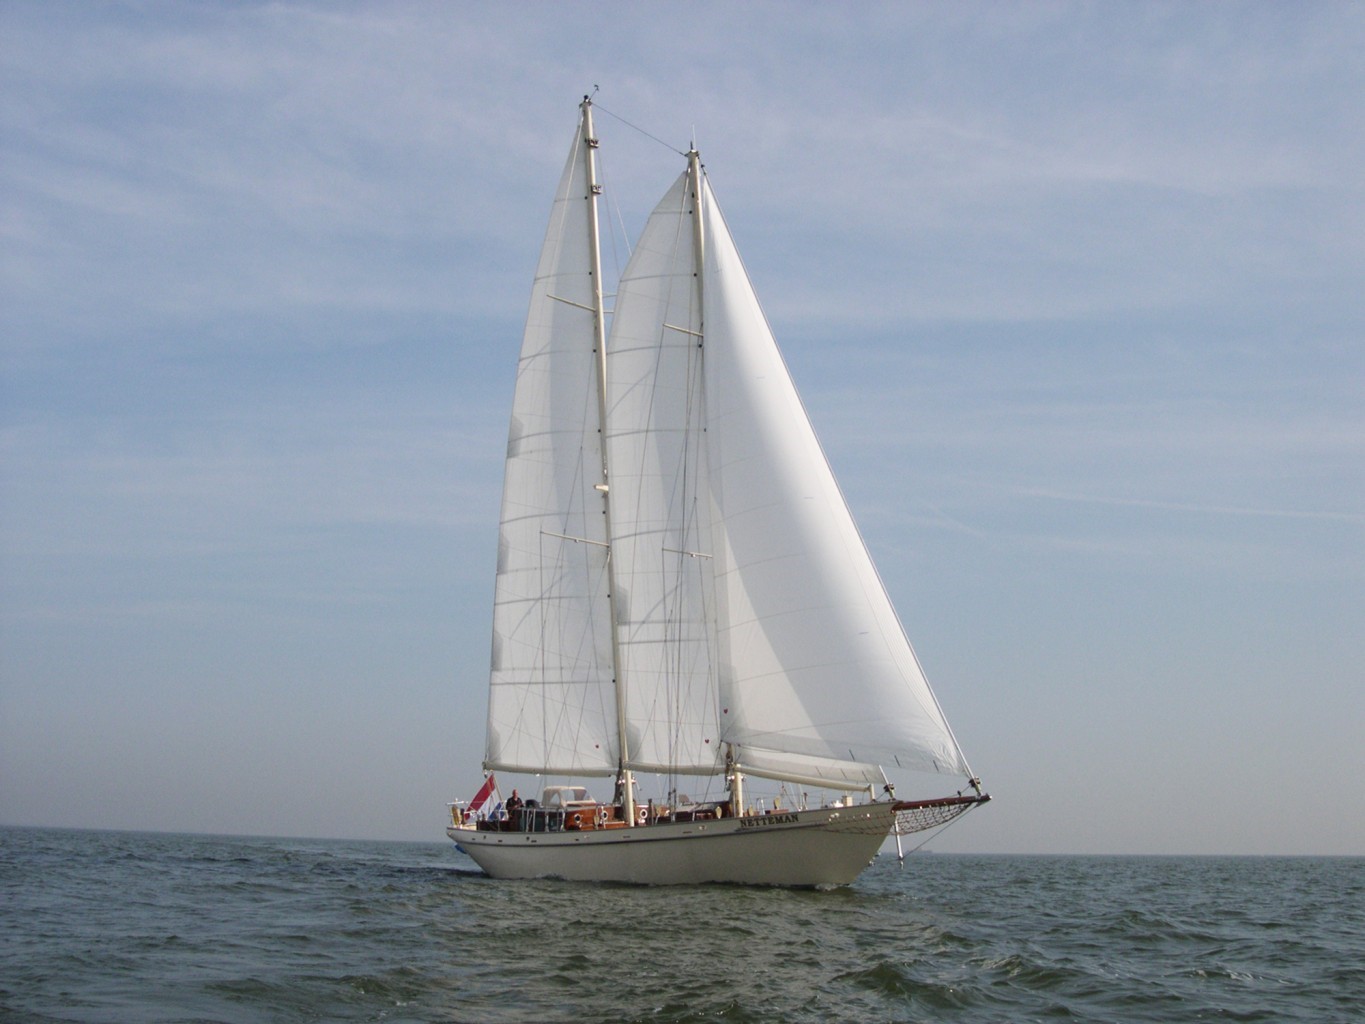 This is 'Ahoy' at anchor, the schooner rigged, classic cruising yacht. Designed by the renowned Dutch naval architect Olivier Van Meer and built at the V&O yachting facility in Holland in 2006, she is available for sale through OC Performance Yacht Brokers.